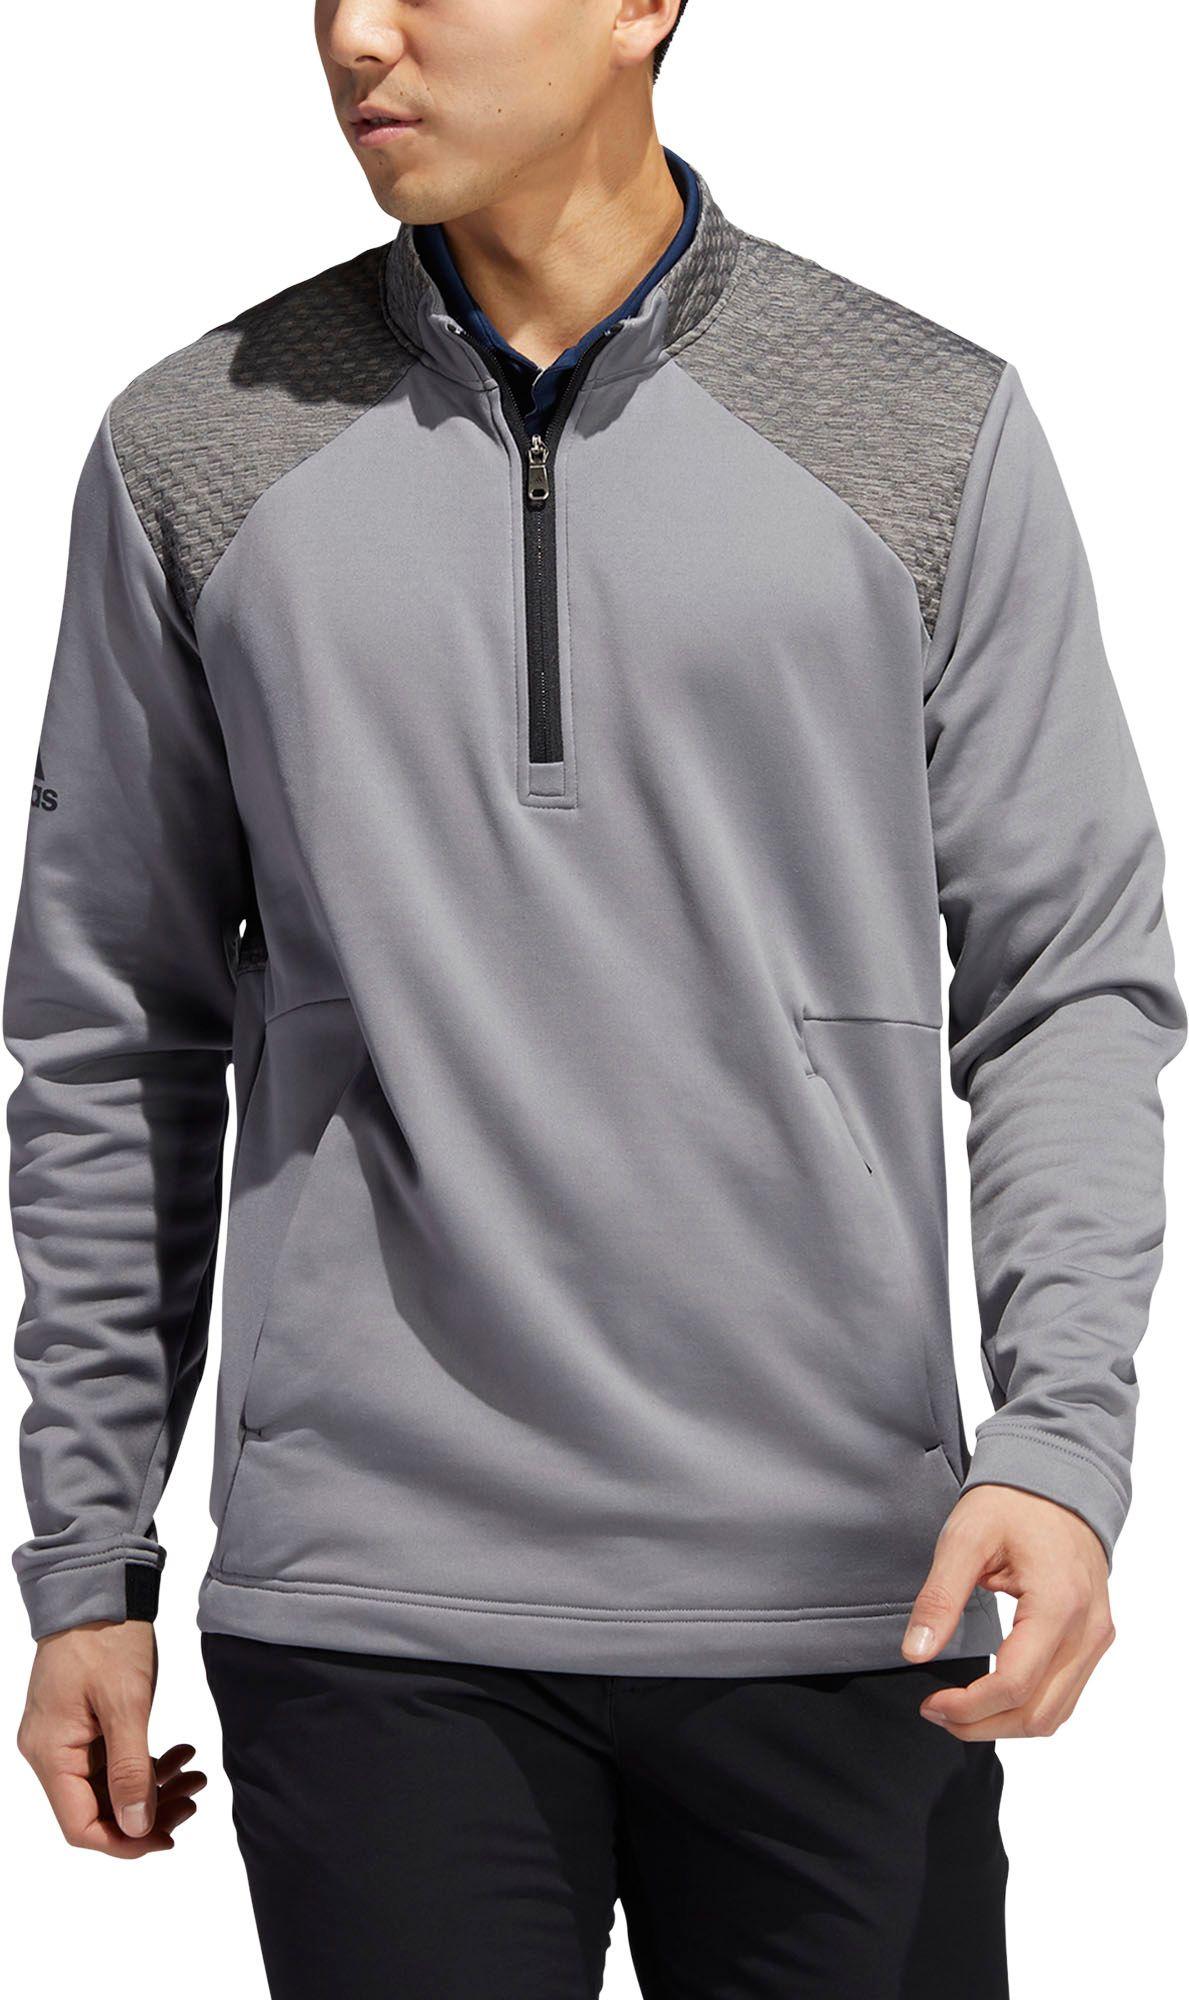 adidas Fleece Cold.rdy 1⁄4-zip Golf Pullover in Gray for Men - Lyst